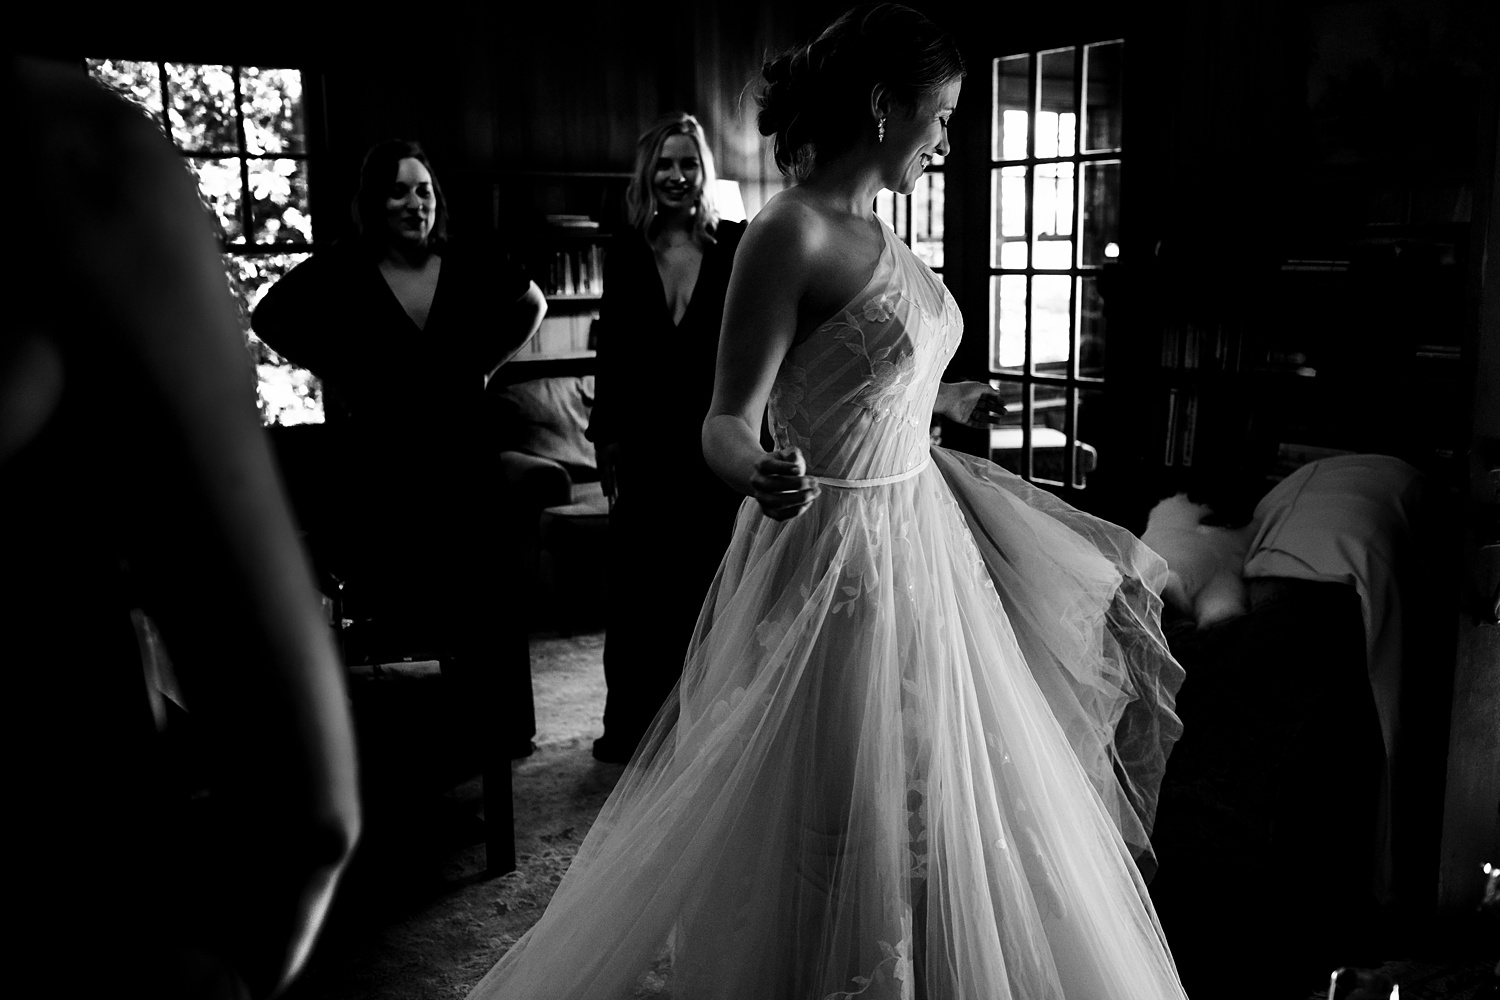 The bride spins in her wedding day dress